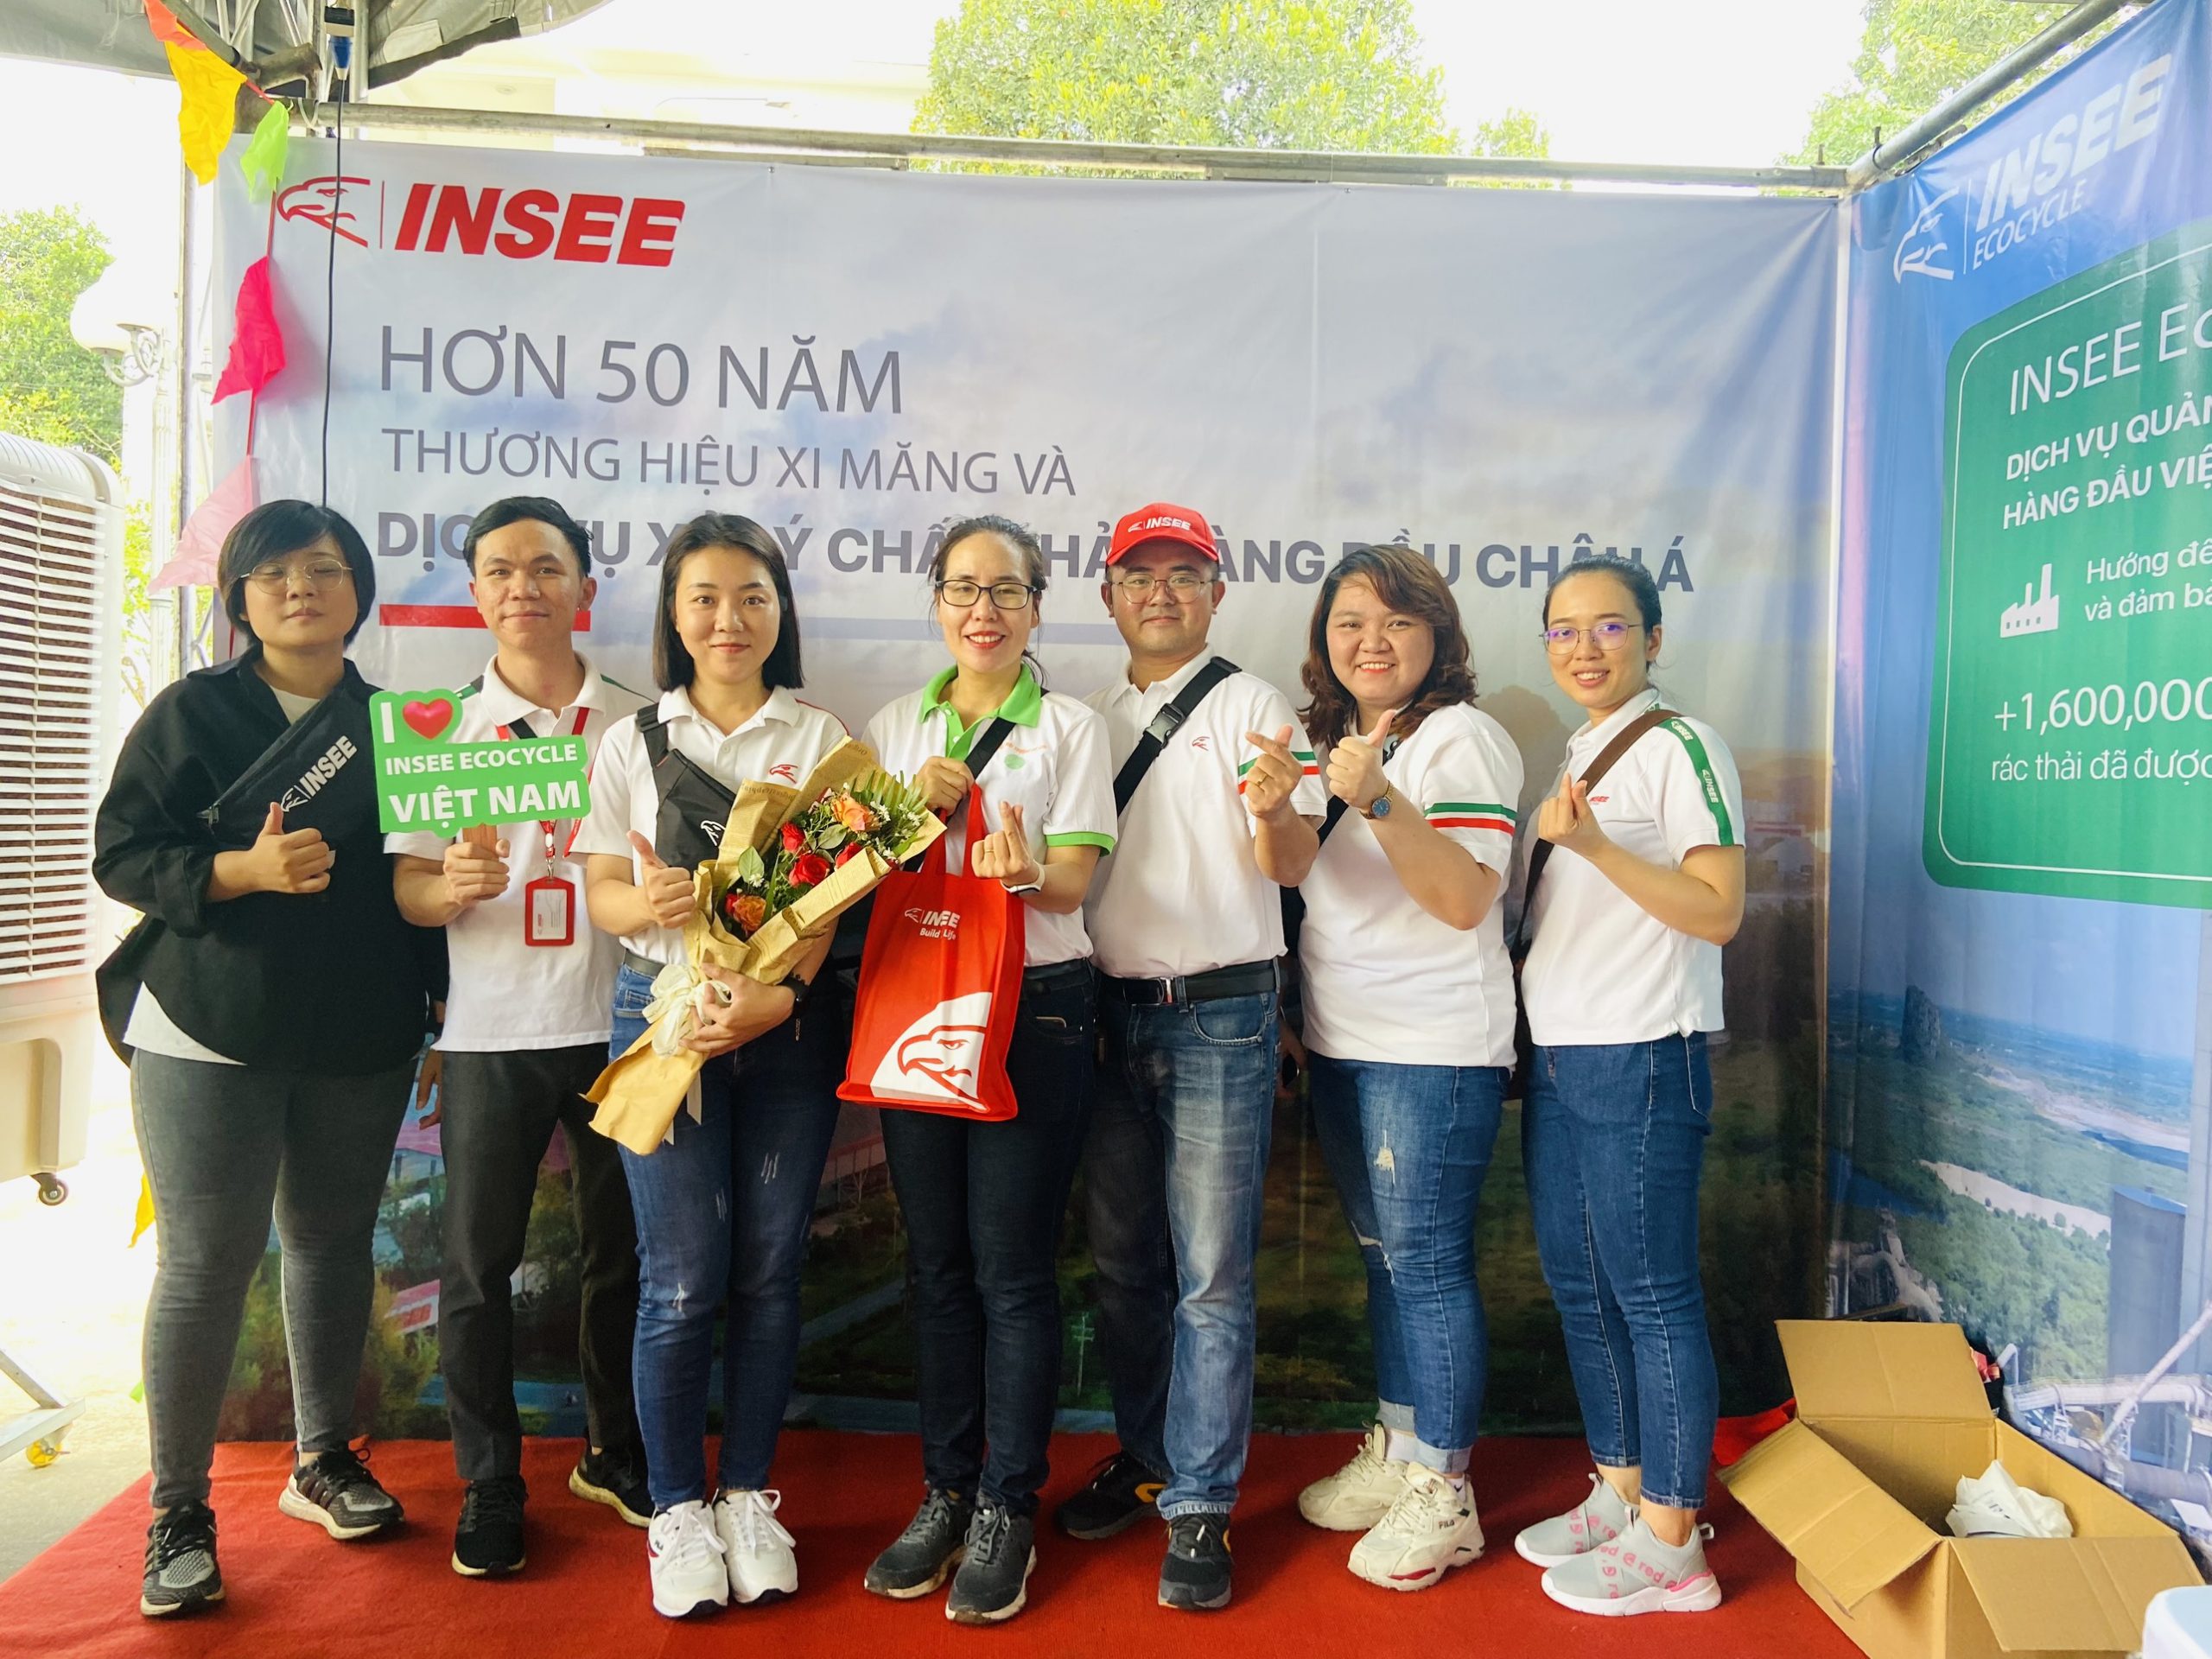 Image 1: INSEE participated in opening a gift exchange booth in the Green Dong Nai Week program, organized by the Department of Natural Resources and Environment of Dong Nai province